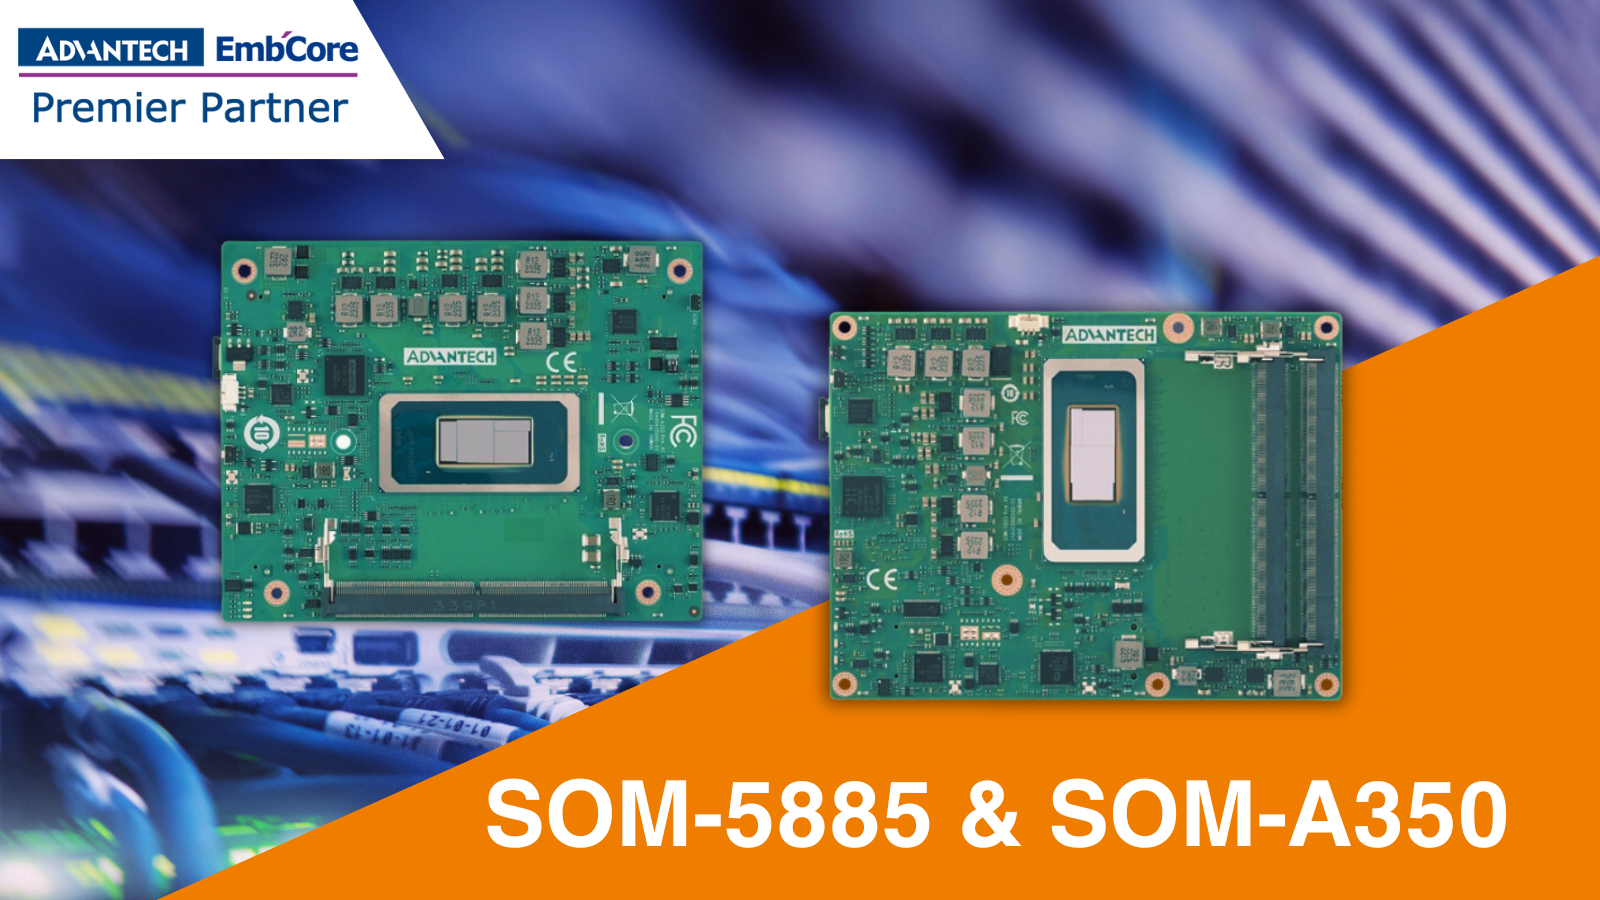 You are currently viewing Advantech introduces Revolutionary Computer-on-Modules: SOM-5885 and SOM-A350